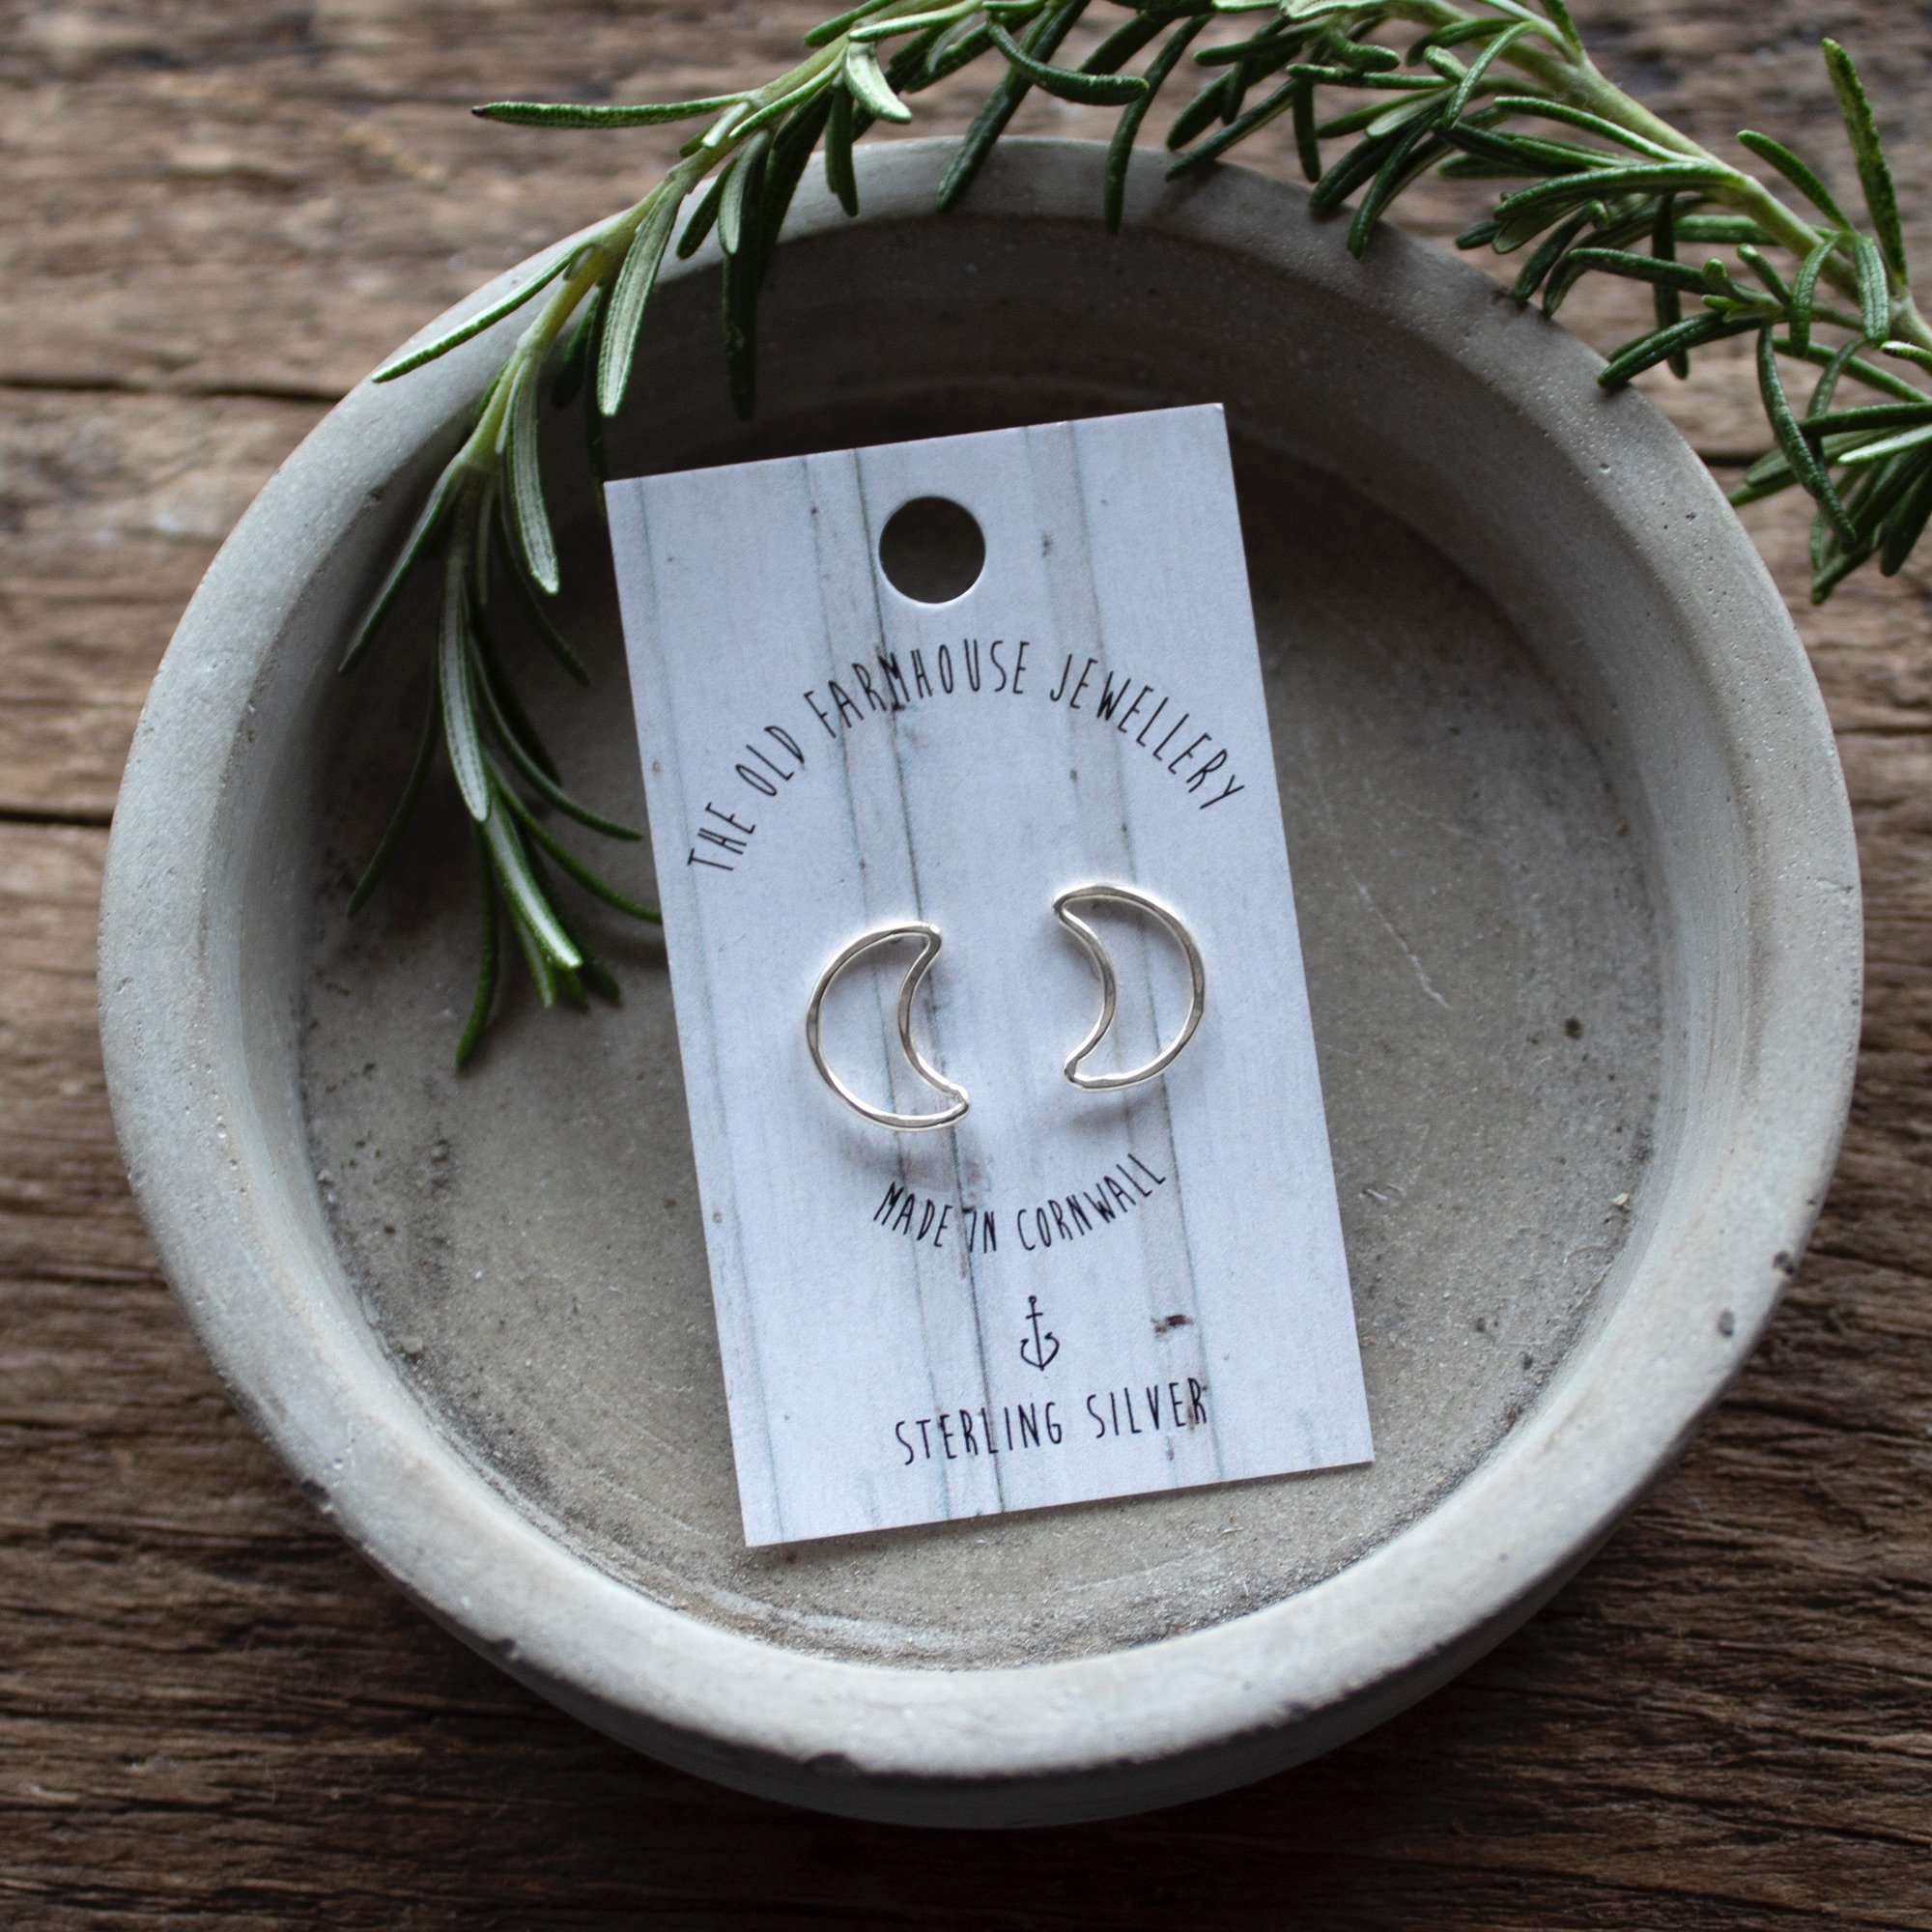 Welcome To The Old Farmhouse Jewellery